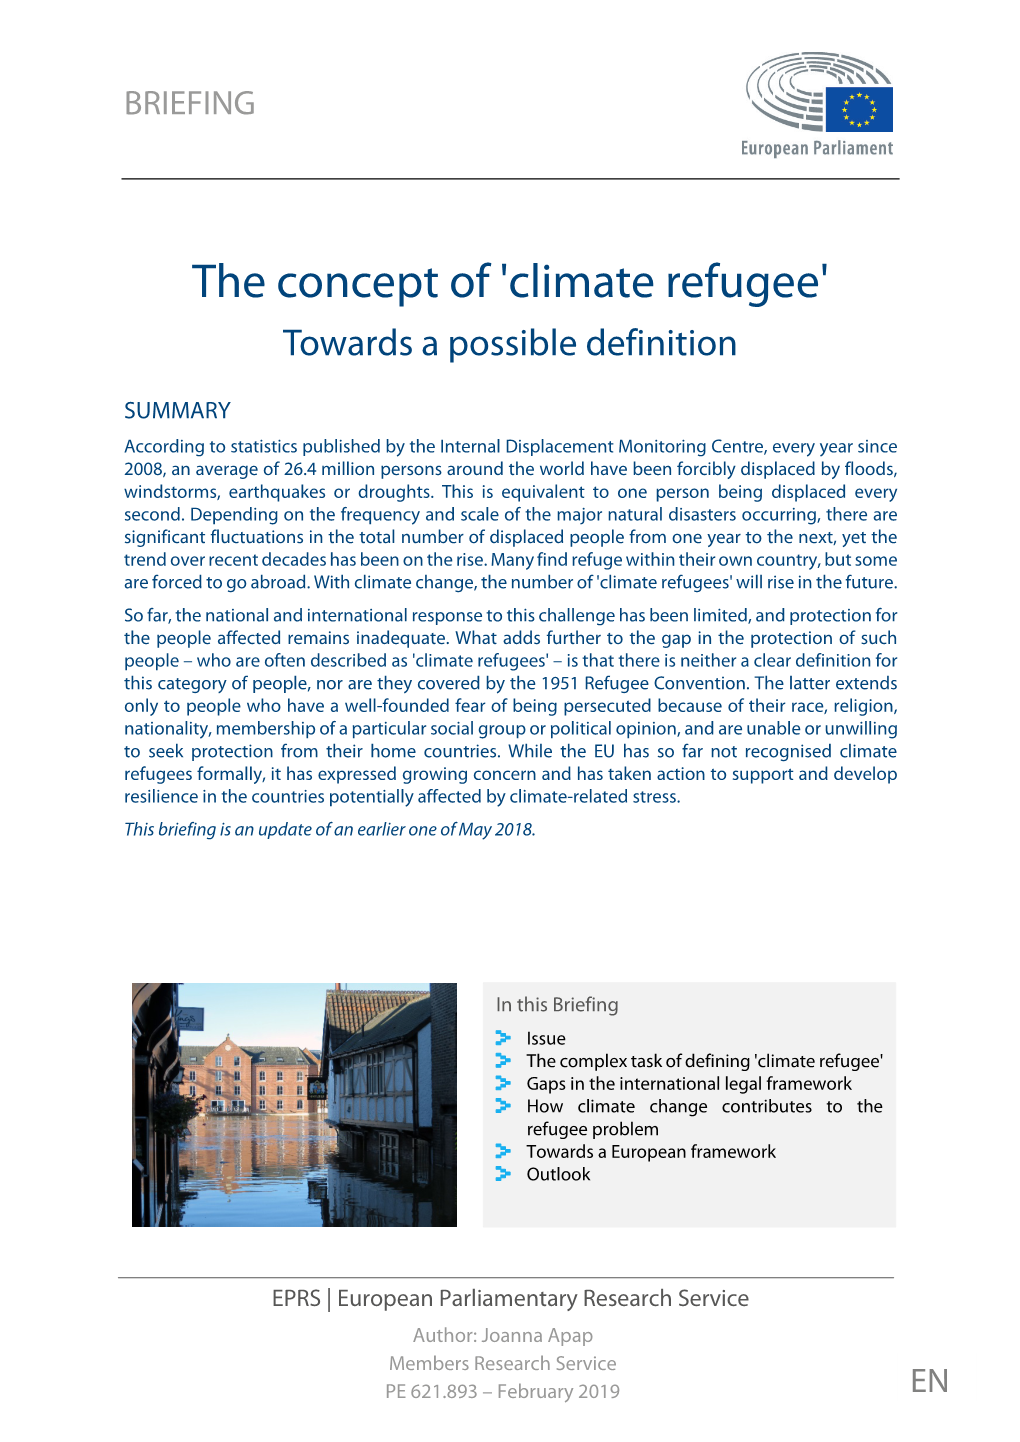 The Concept of 'Climate Refugee' Towards a Possible Definition